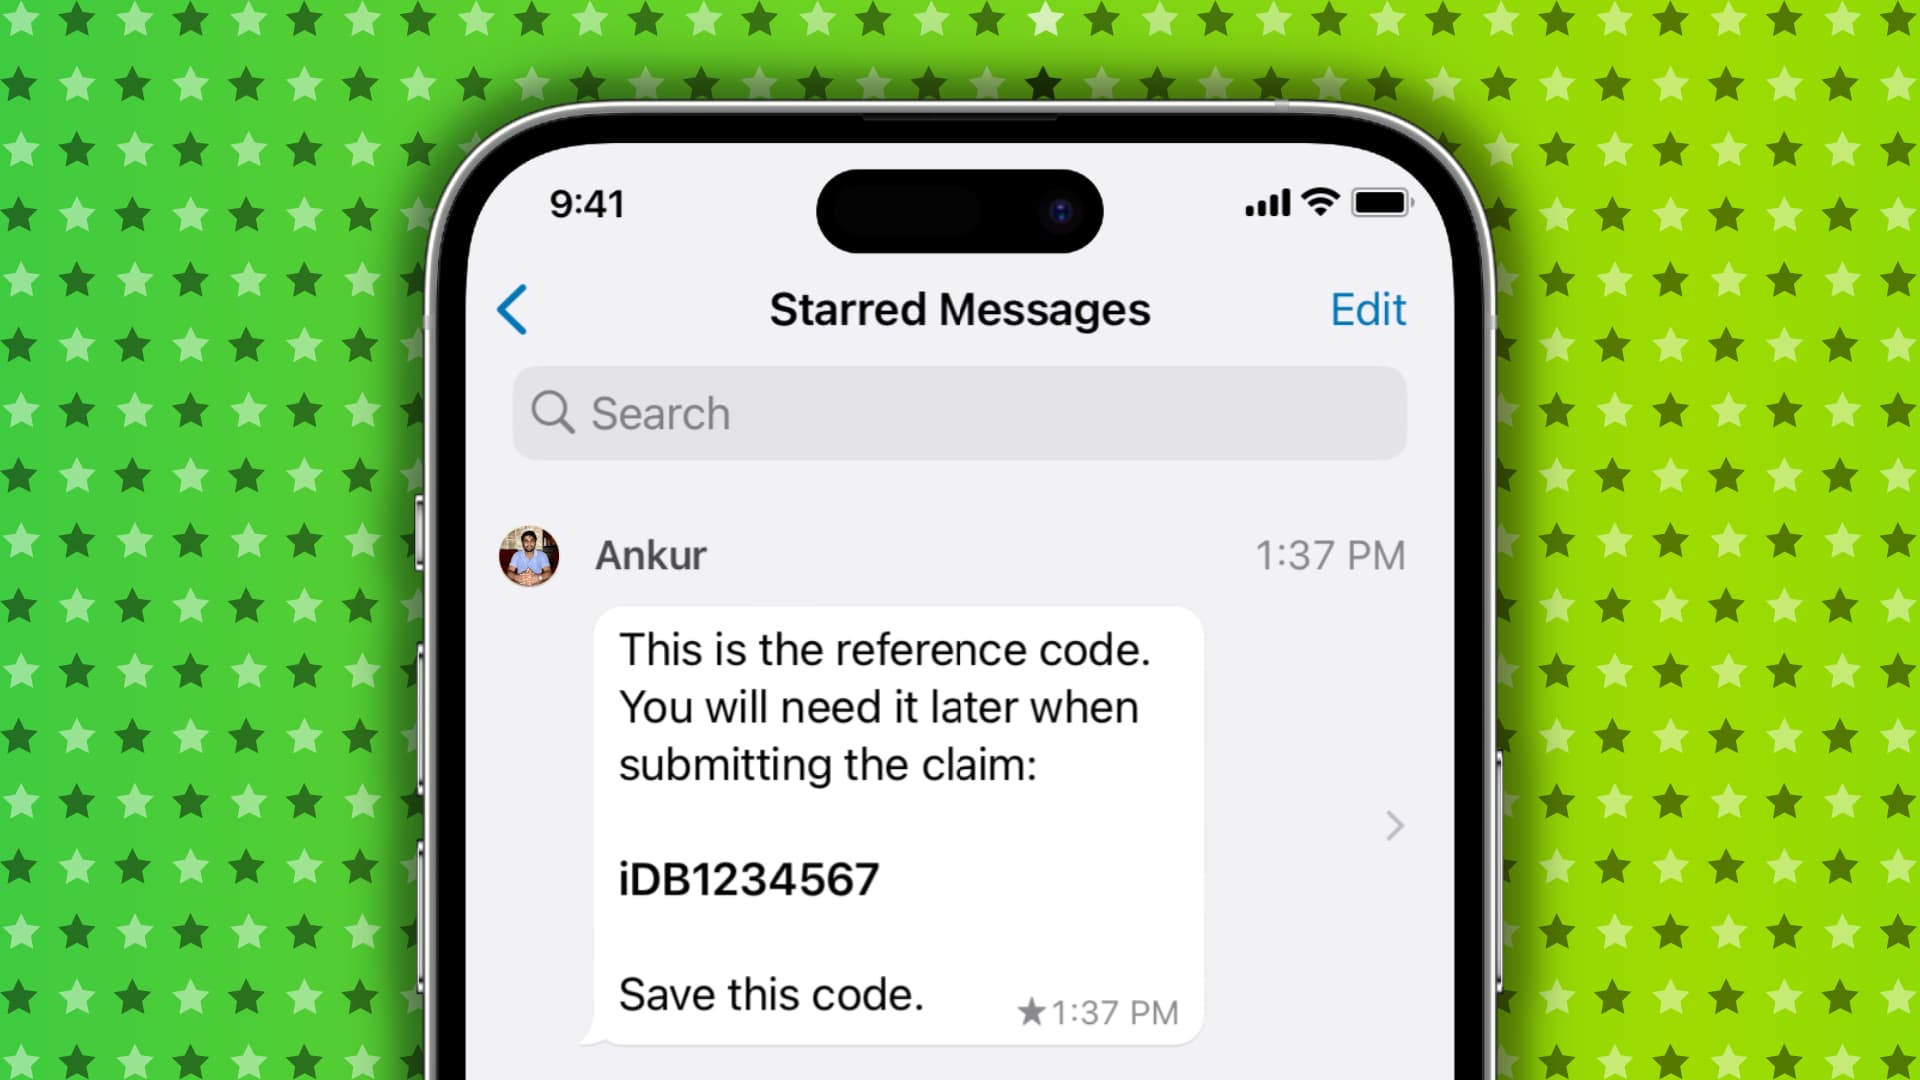 Star messages in WhatsApp on iPhone